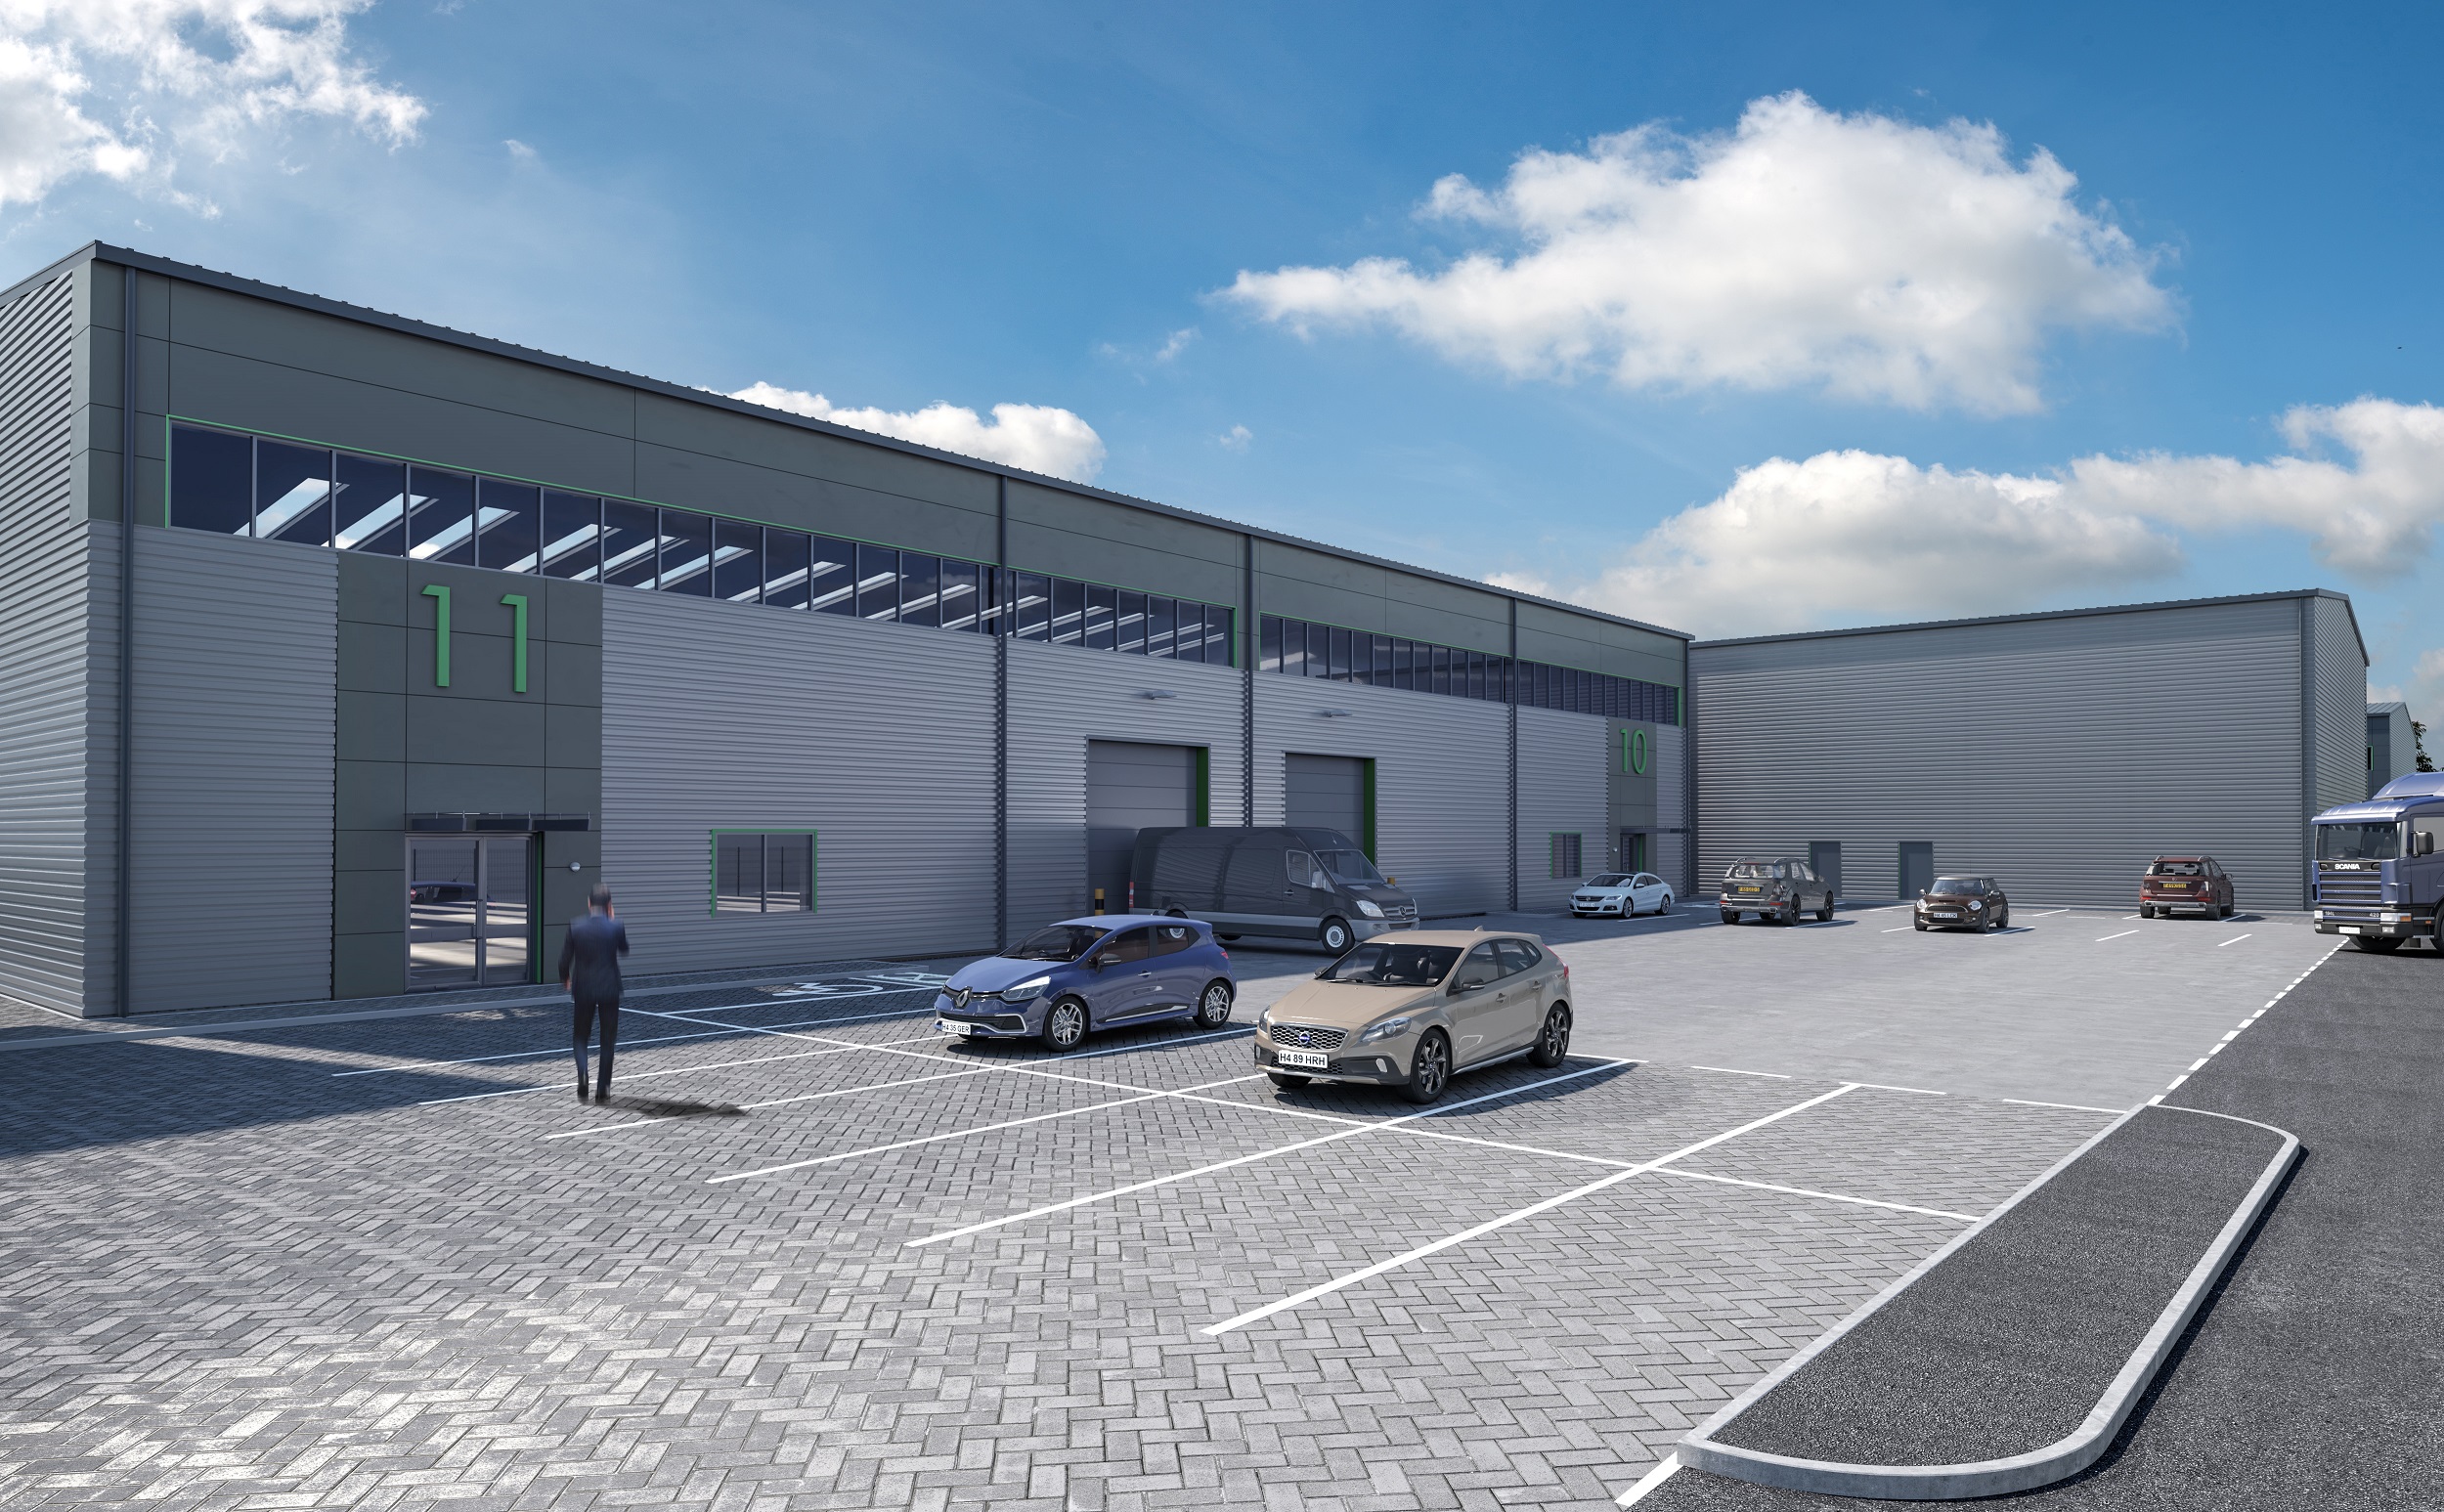 Minworth Industrial Park is set for a £6 million investment which will create 140 new jobs